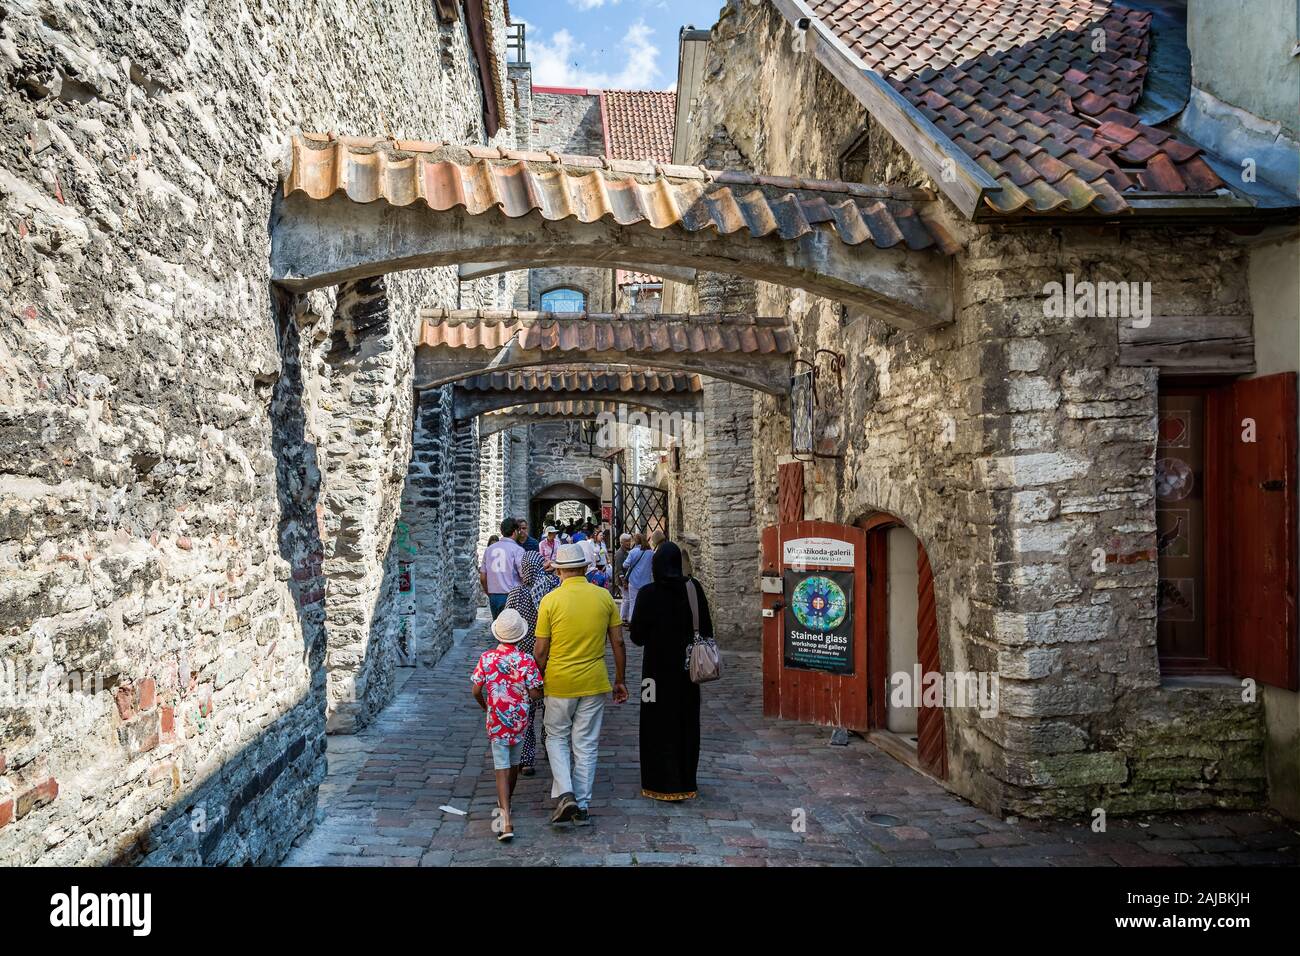 St Catherine's Passage - a picturesque medieval walkway with stone arches - in Tallinn, Estonia on 21 July 2019 Stock Photo